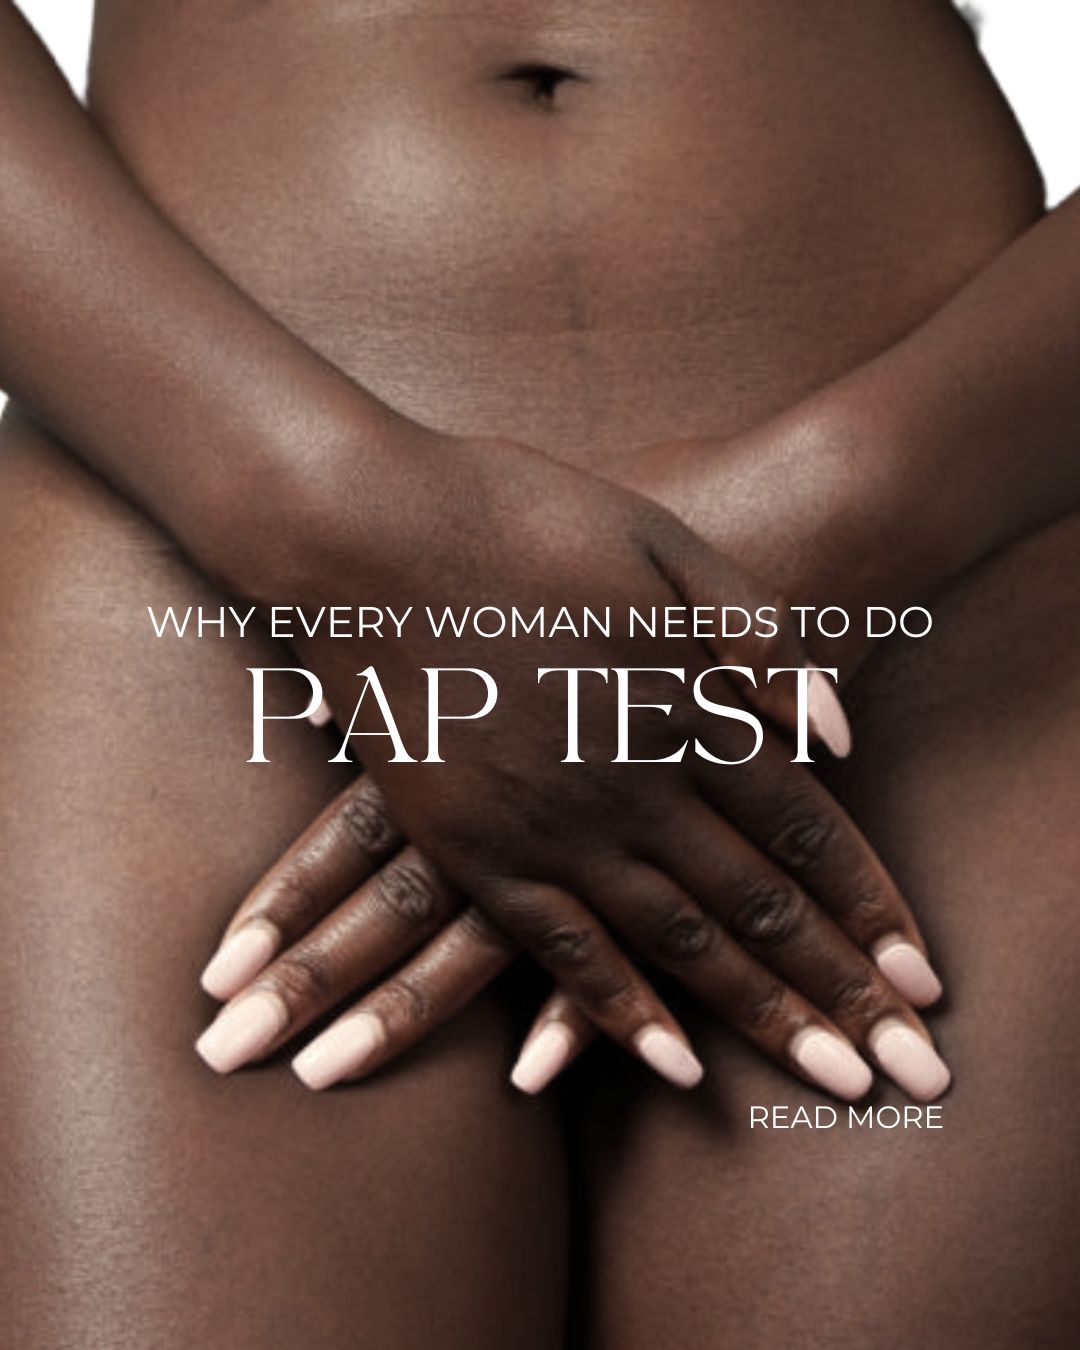 EVERY WOMAN SHOULD KNOW: Why every woman needs to do a PAP TEST